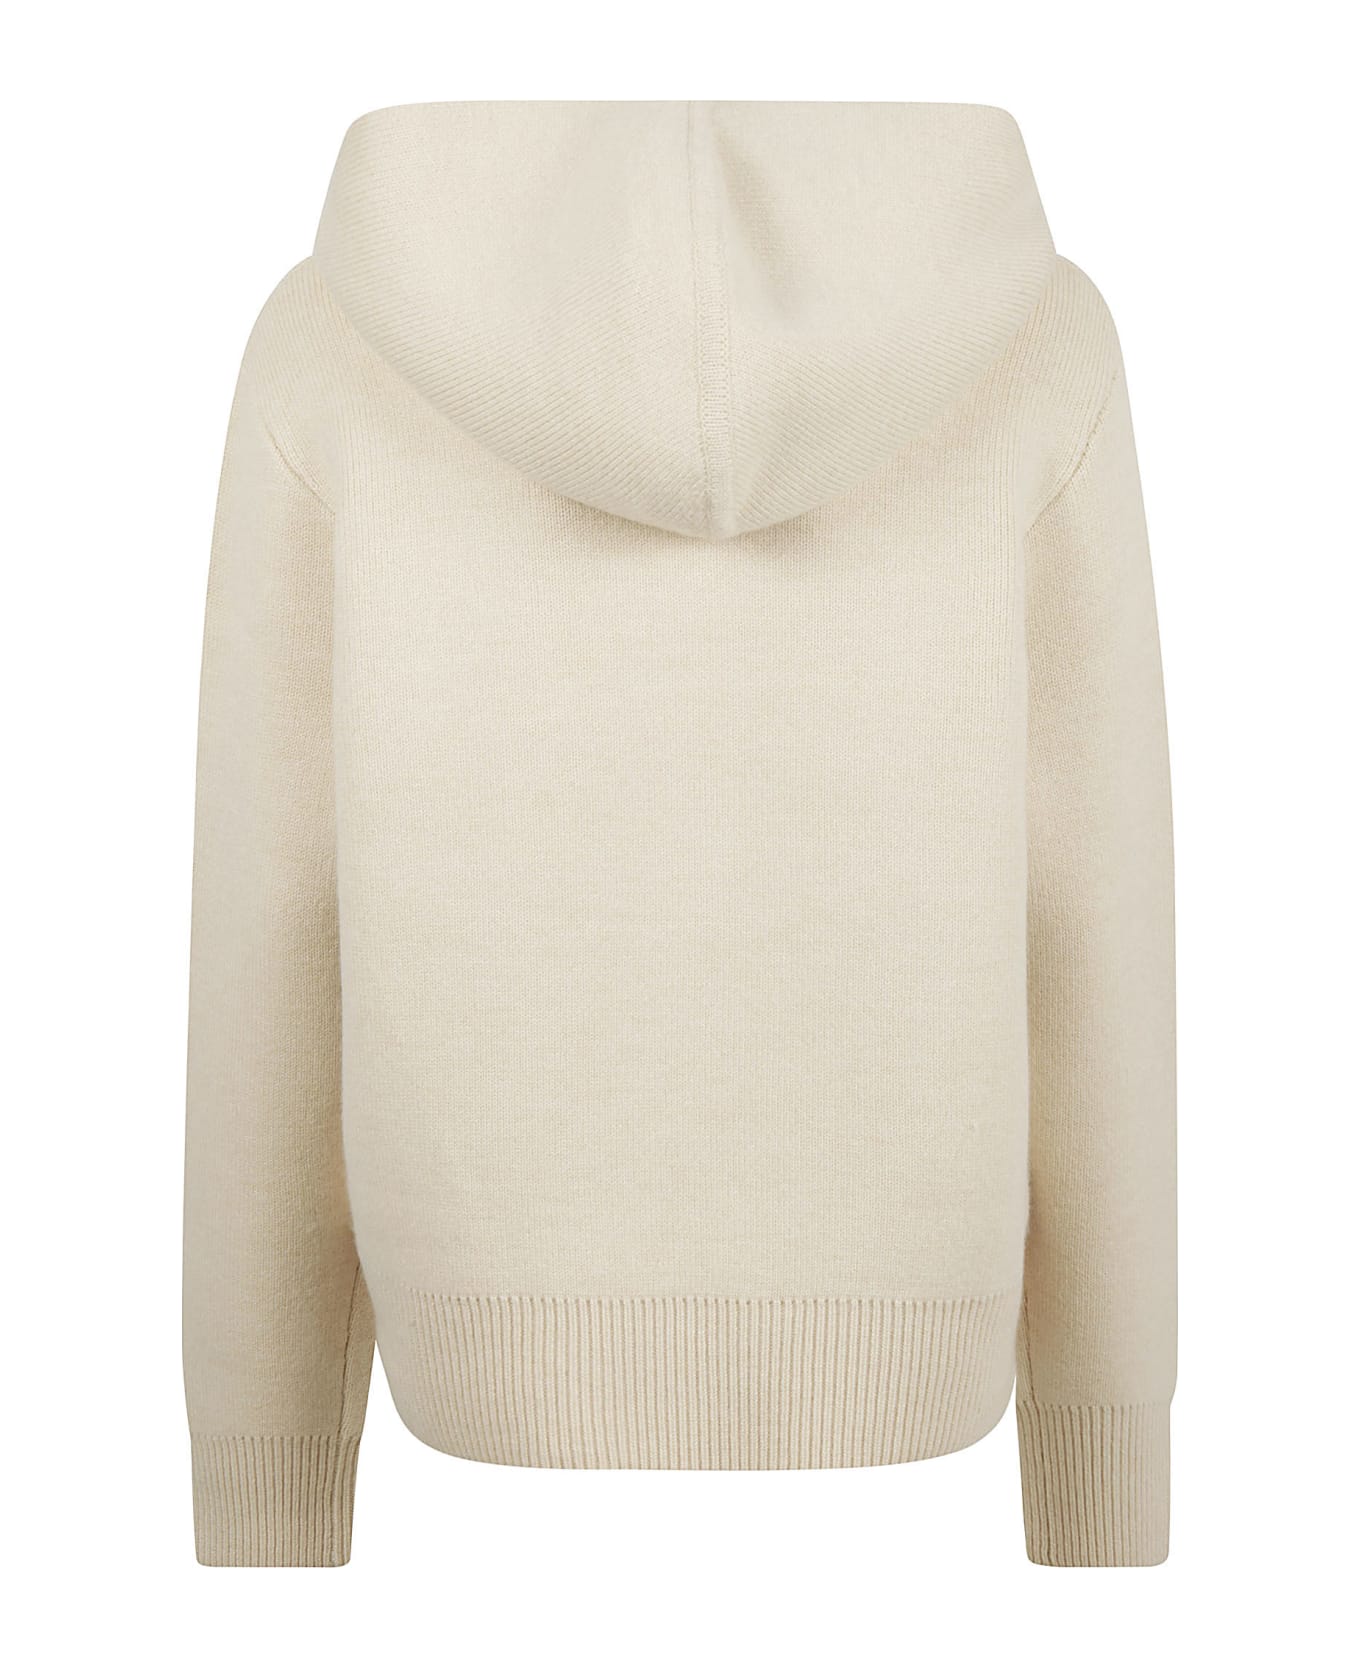 Tory Burch Cashmere Blend Hoodie - Plage